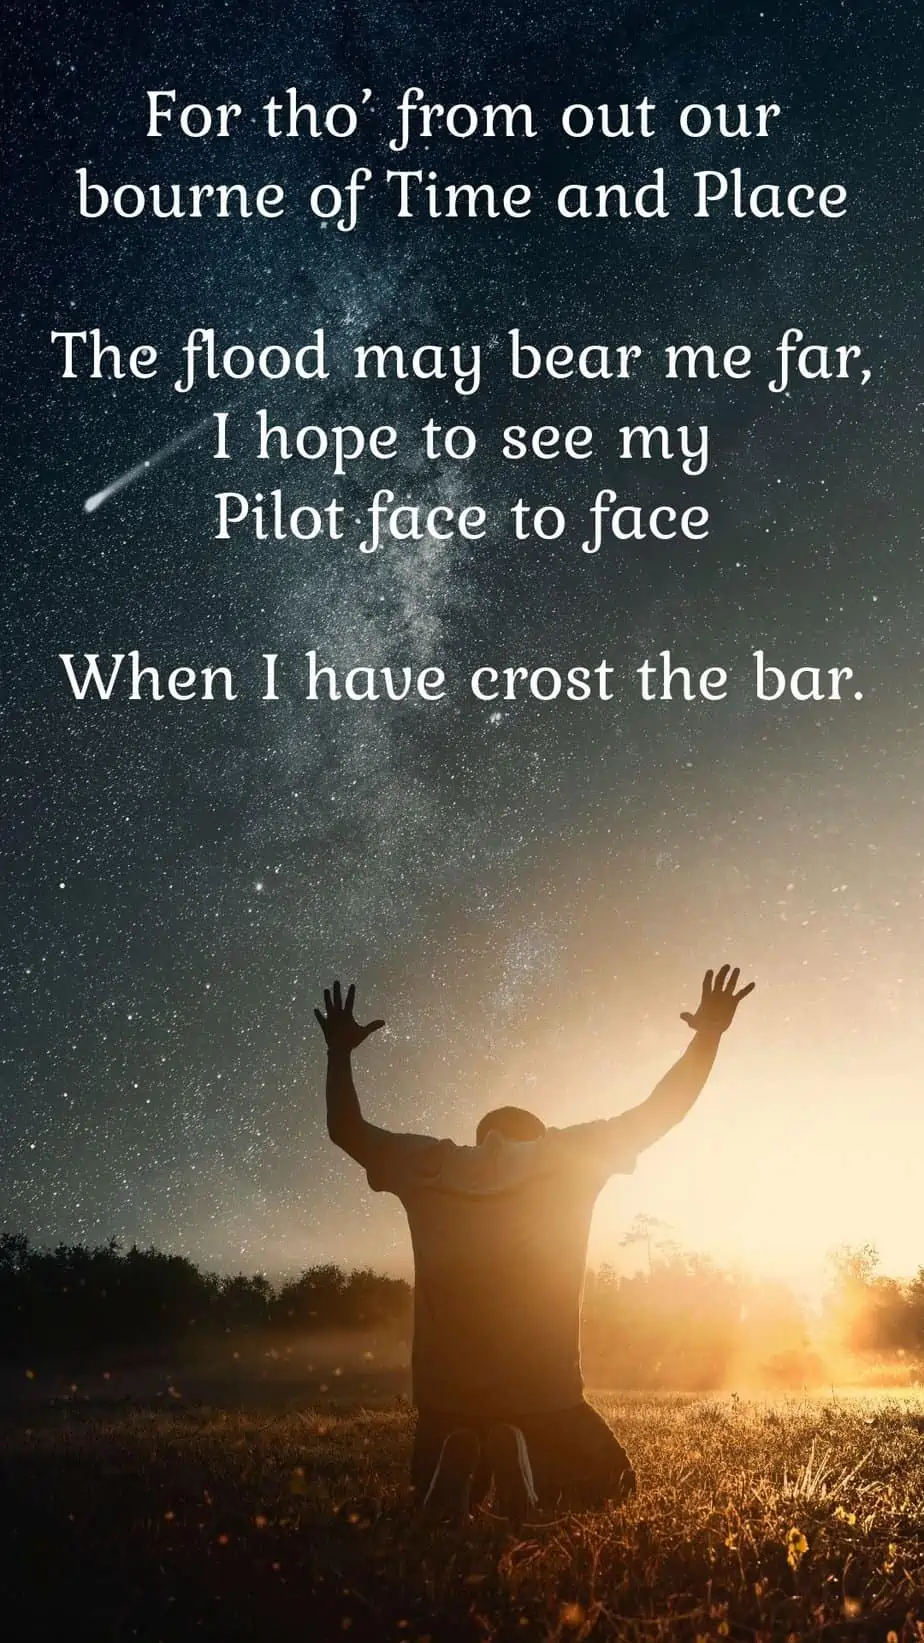 Crossing The Bar Quote
For tho' from out our bourne of Time and Place
The flood may bear me far,
I hope to see my Pilot face to face
When I have crost the bar.